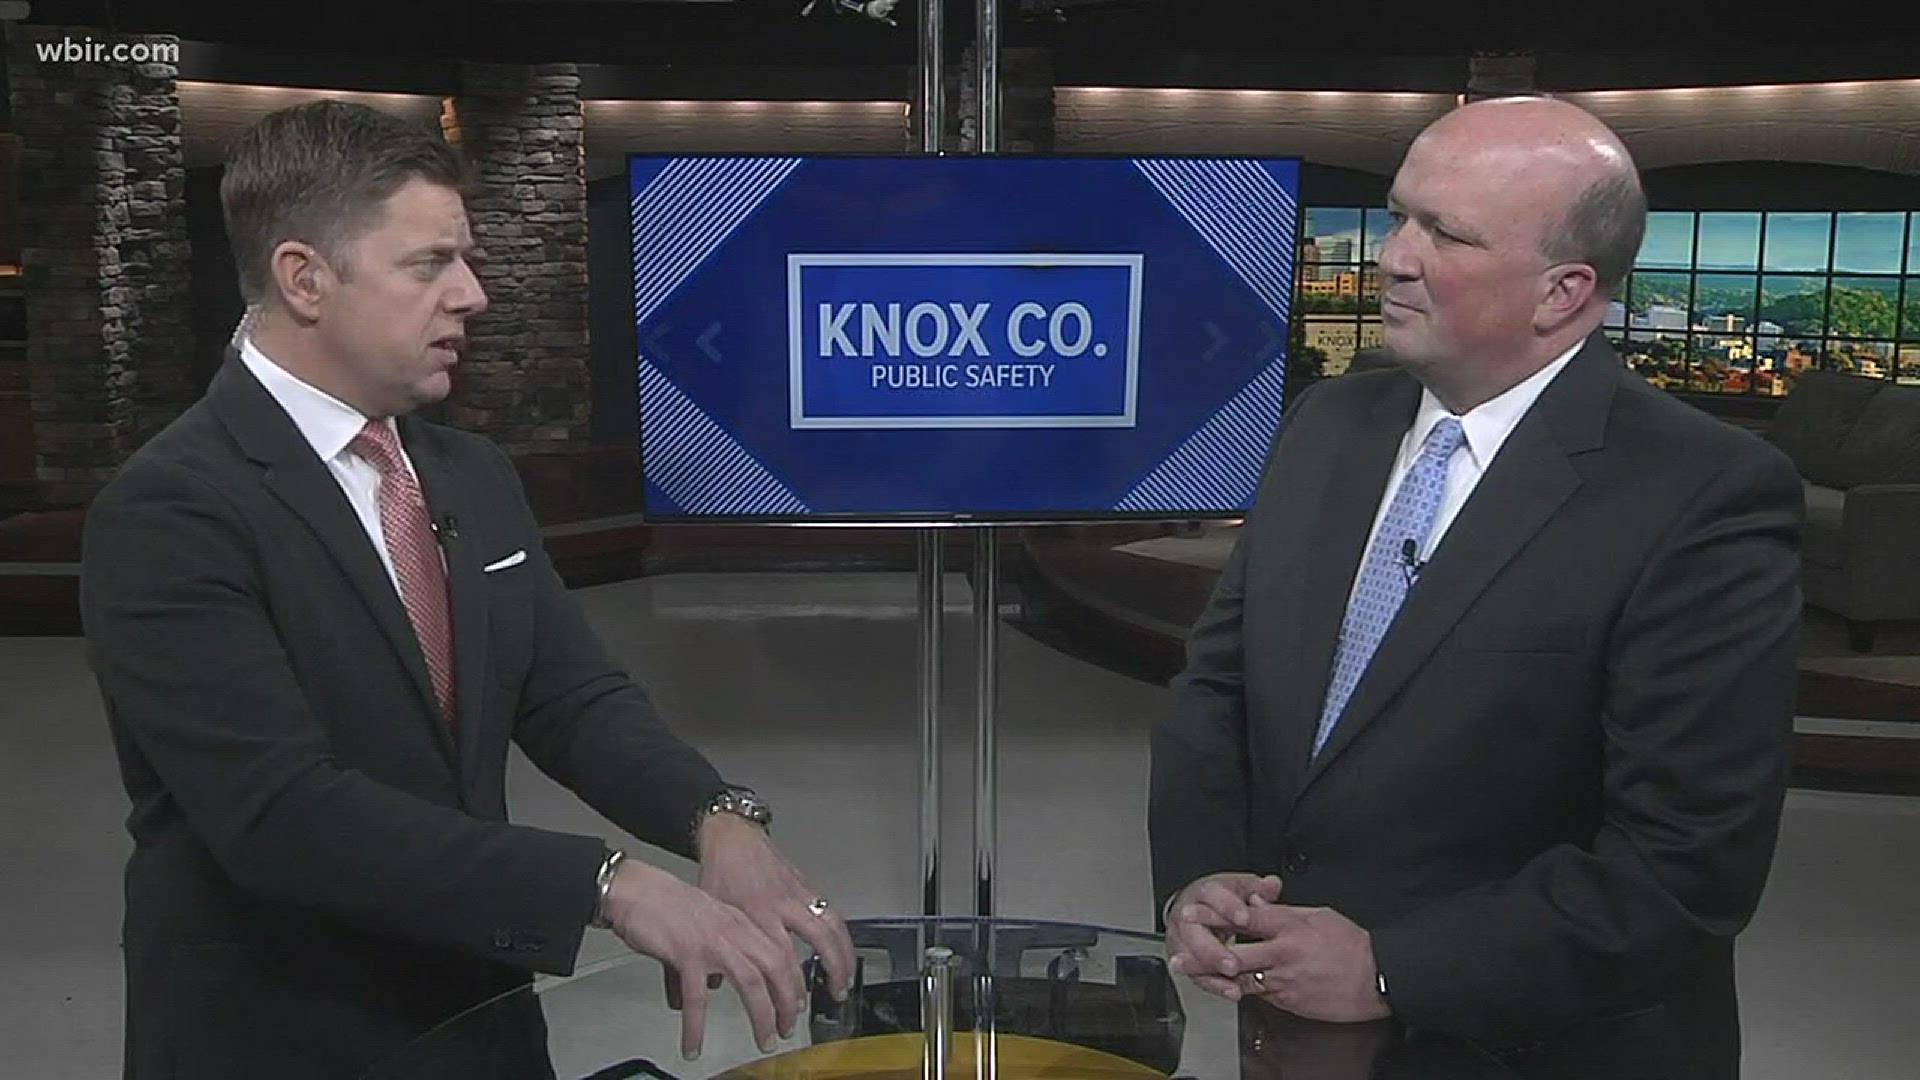 Knox County mayoral candidate talks about pubic safety in Knox County